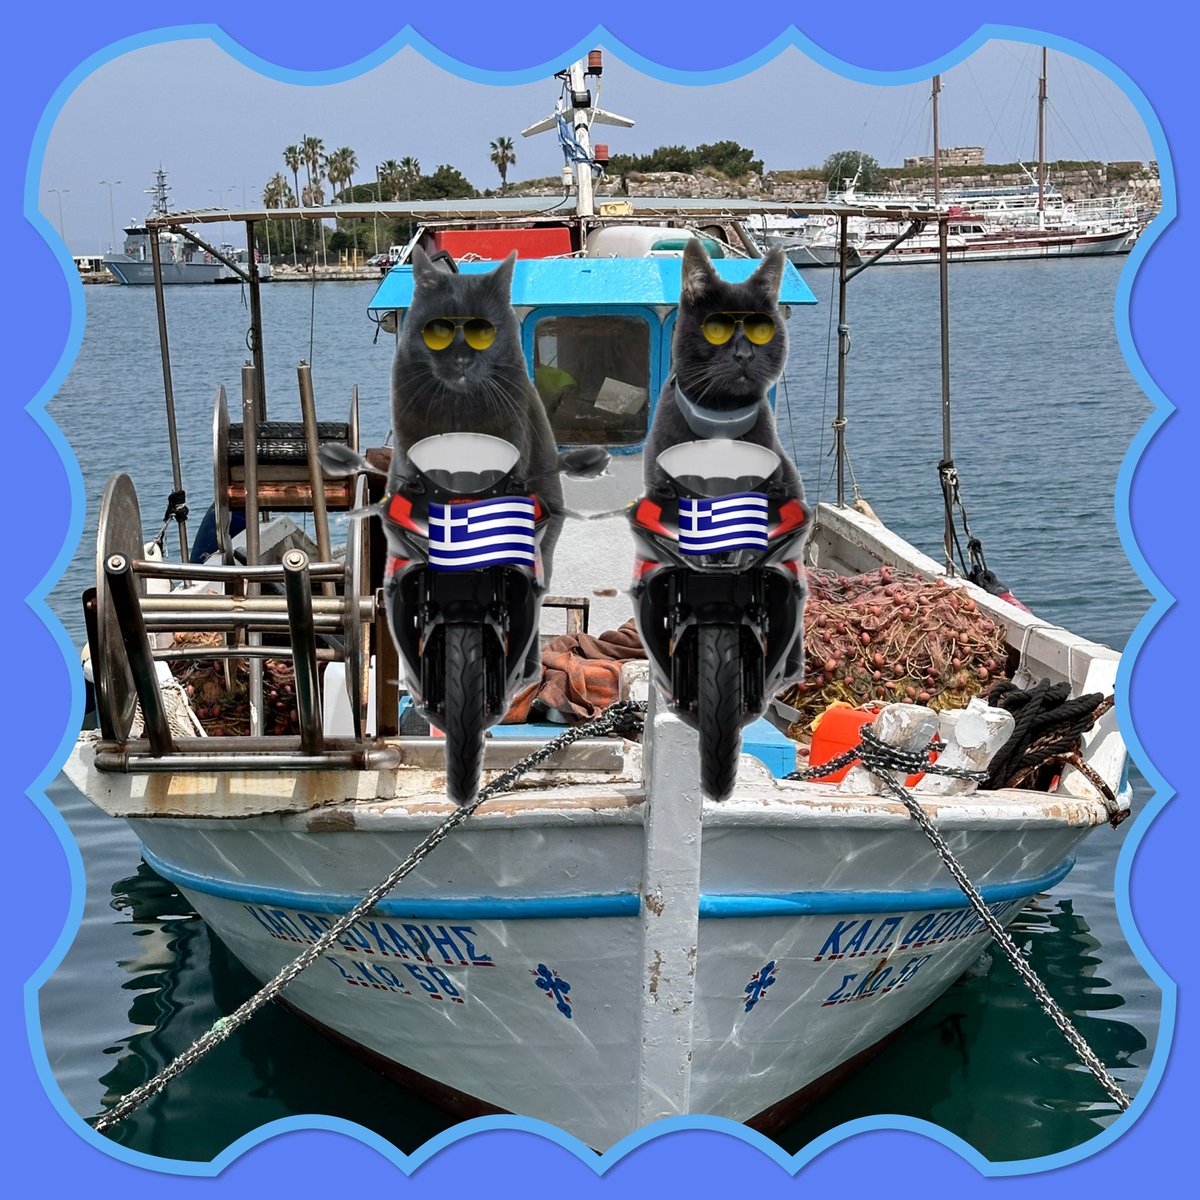 #Hedgewatch #theruffriderz #TwoGreekBrothers #PostcardFromKos @MunchPudding 💙🇬🇷Hey pals! We just arrived at Kos Harbour! We saw Mánkas’s mum’s walking along but they didn’t recognise us! 😹💙 Meow😹